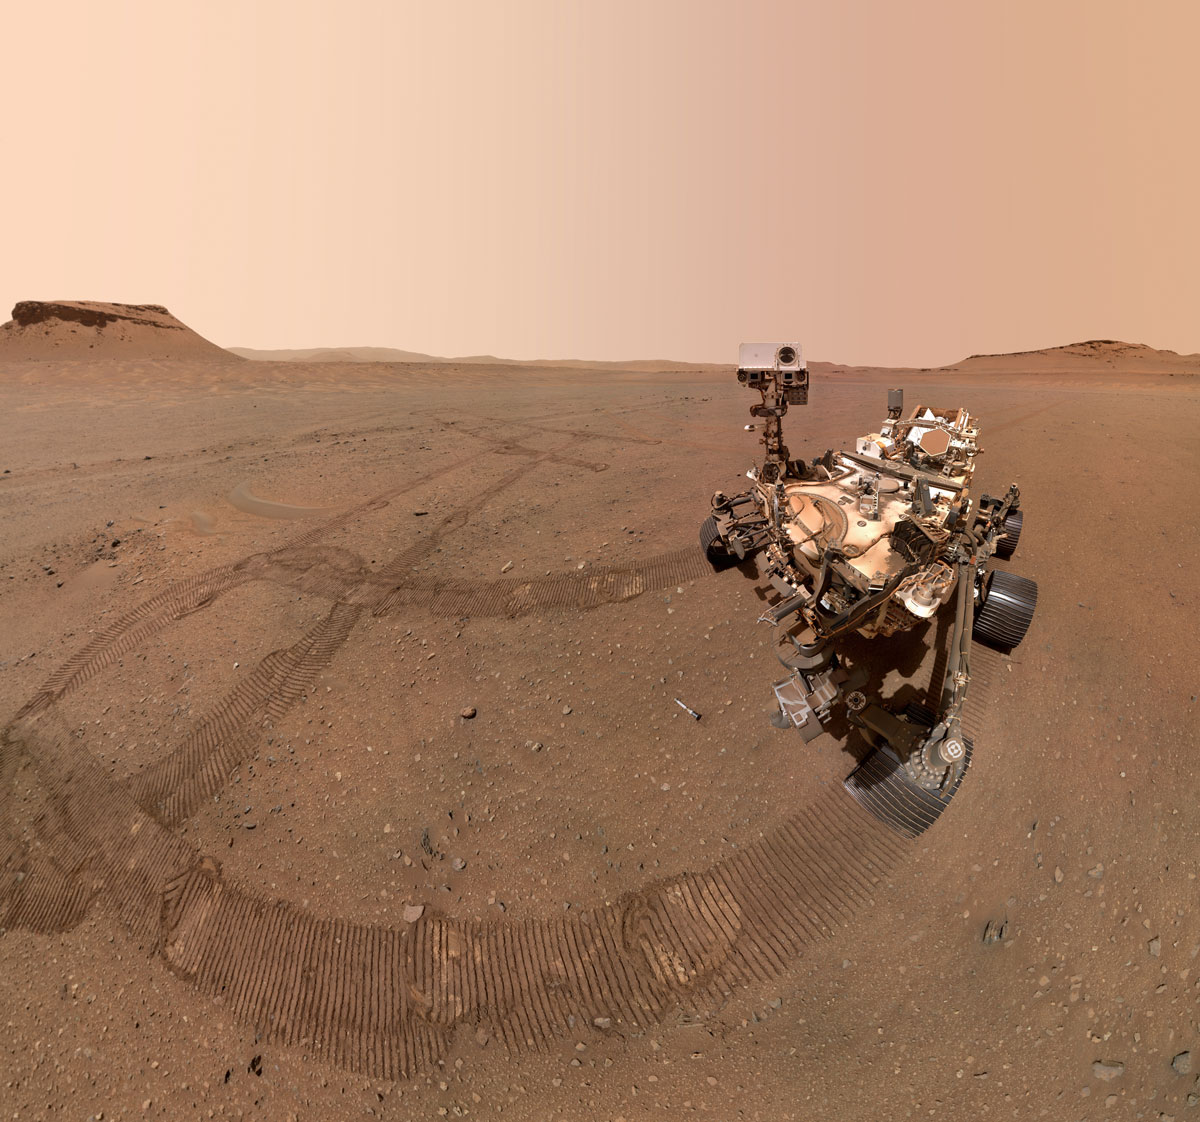 The Perseverance rover on the surface of Mars